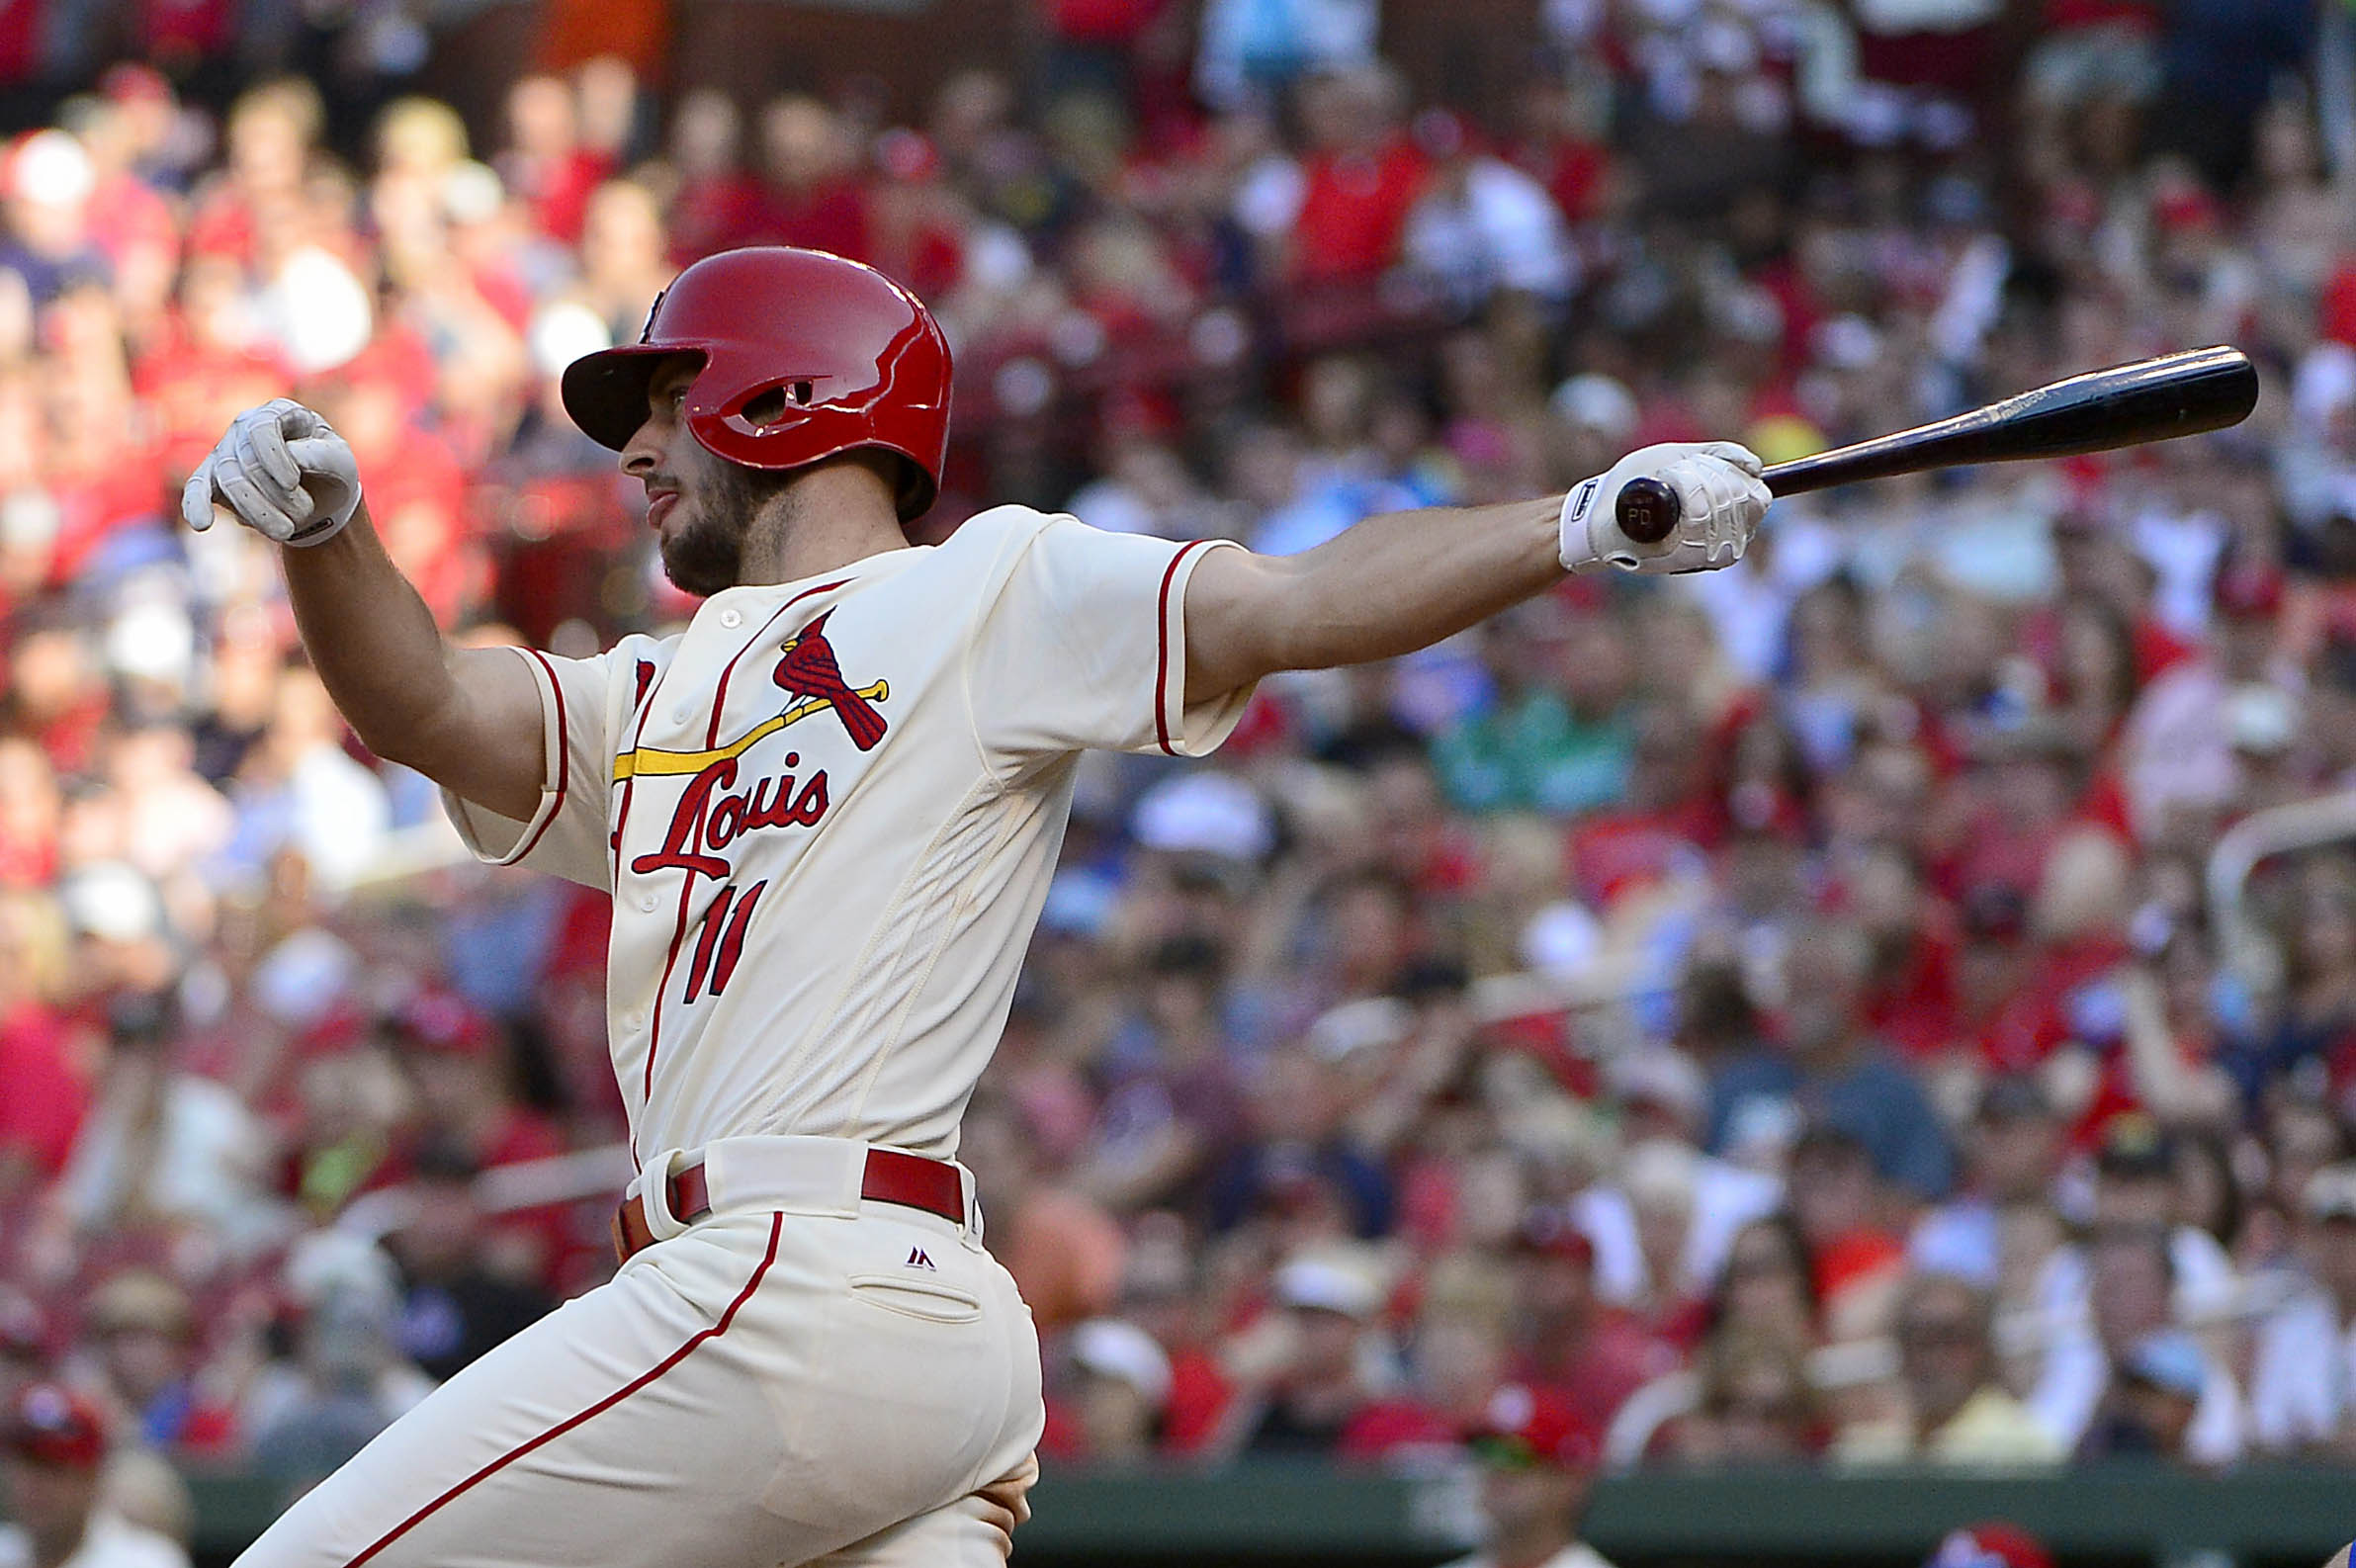 www.bagssaleusa.com | Paul DeJong is a humble stroke of power for the Cardinals